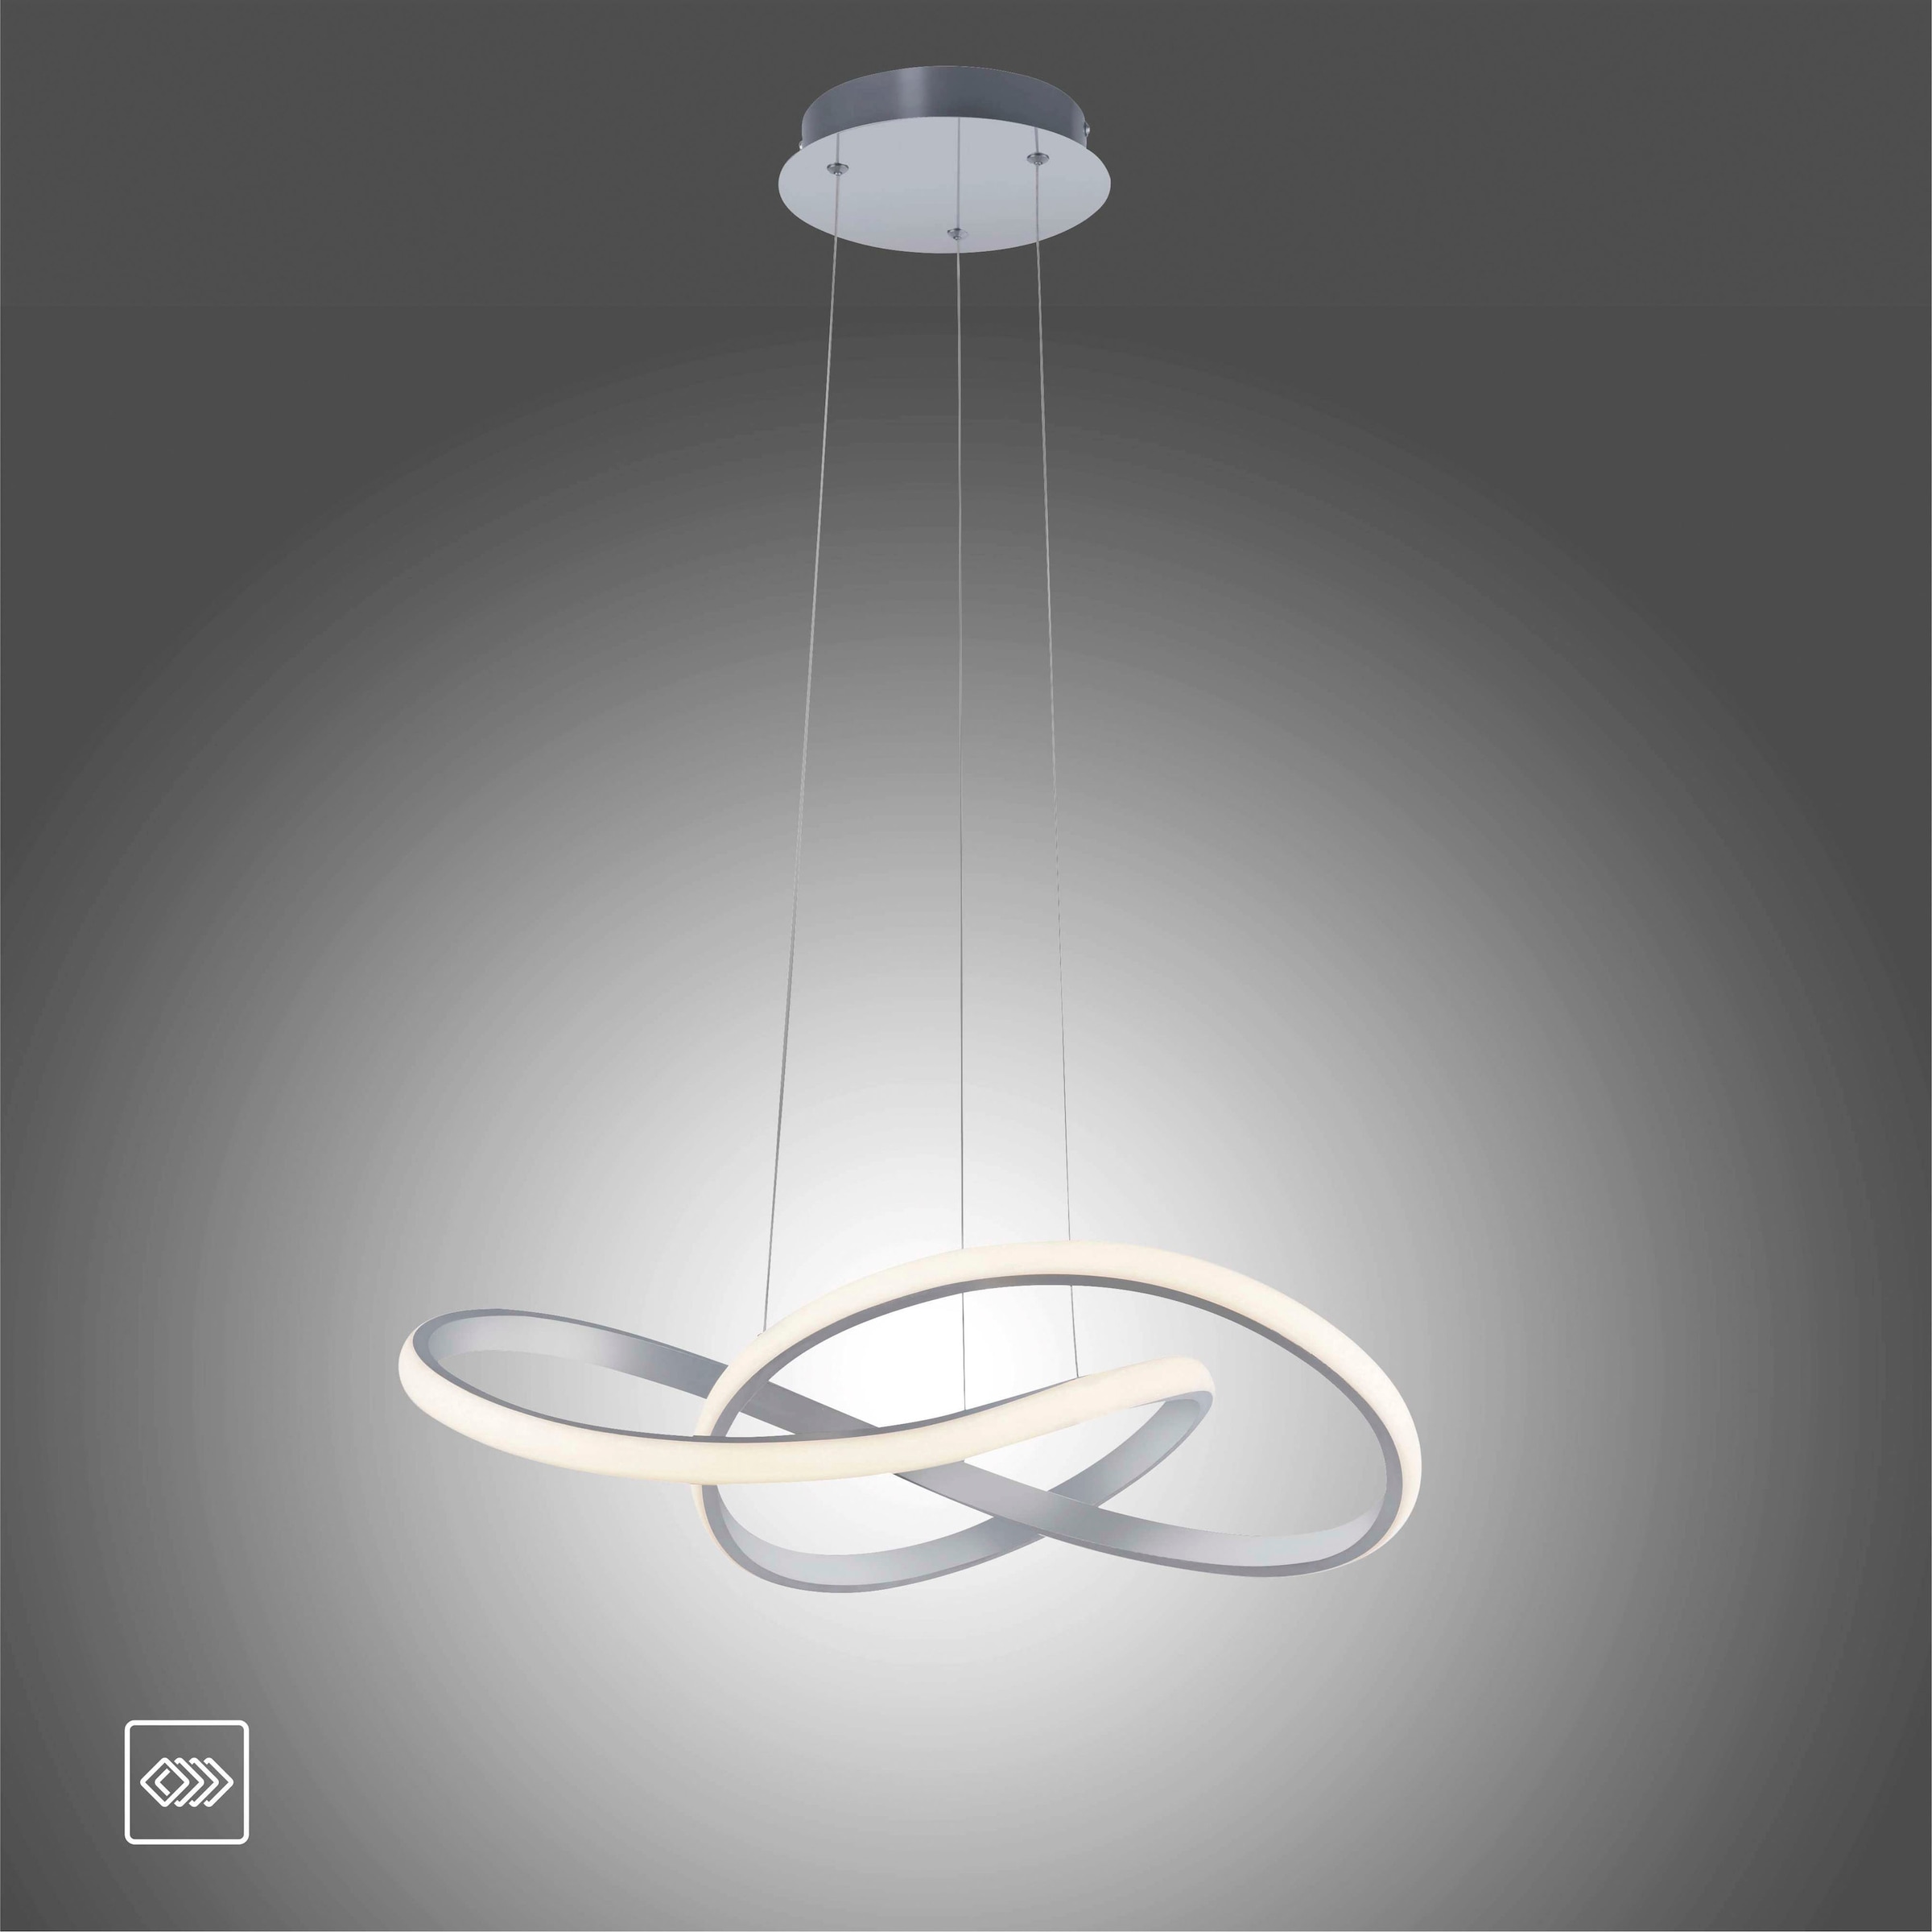 JUST LIGHT Pendelleuchte »MARIA«, 1 flammig-flammig, LED, dimmbar, Switchmo